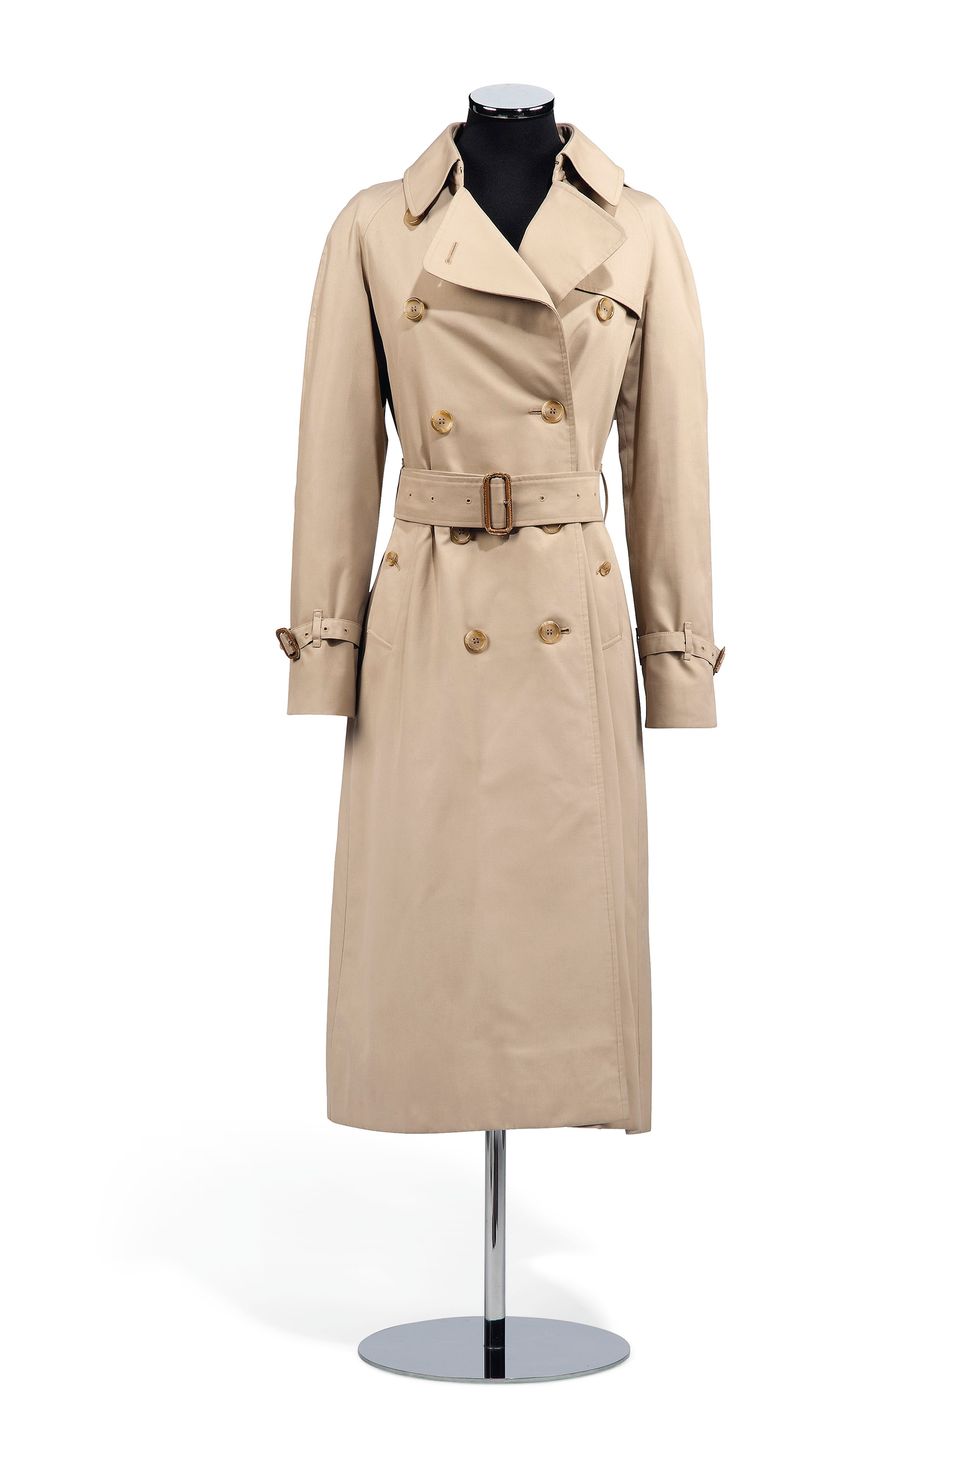 Clothing, Trench coat, Coat, Outerwear, Overcoat, Beige, Sleeve, Collar, Day dress, Dress, 